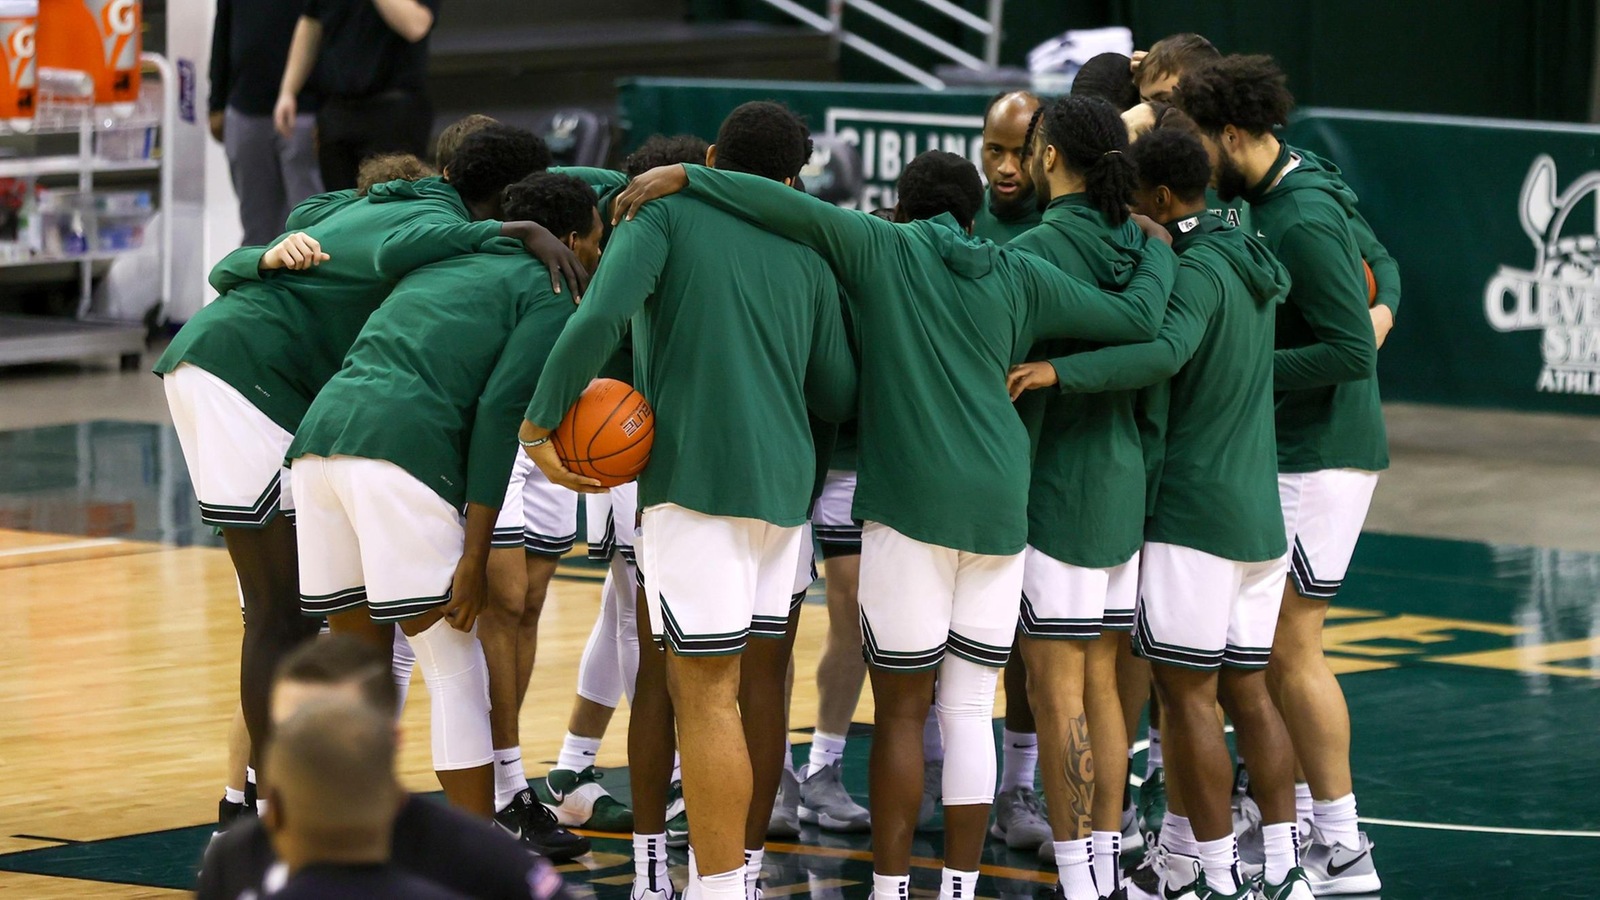 Cleveland State Looks to Continue Its Winning Ways in Indy